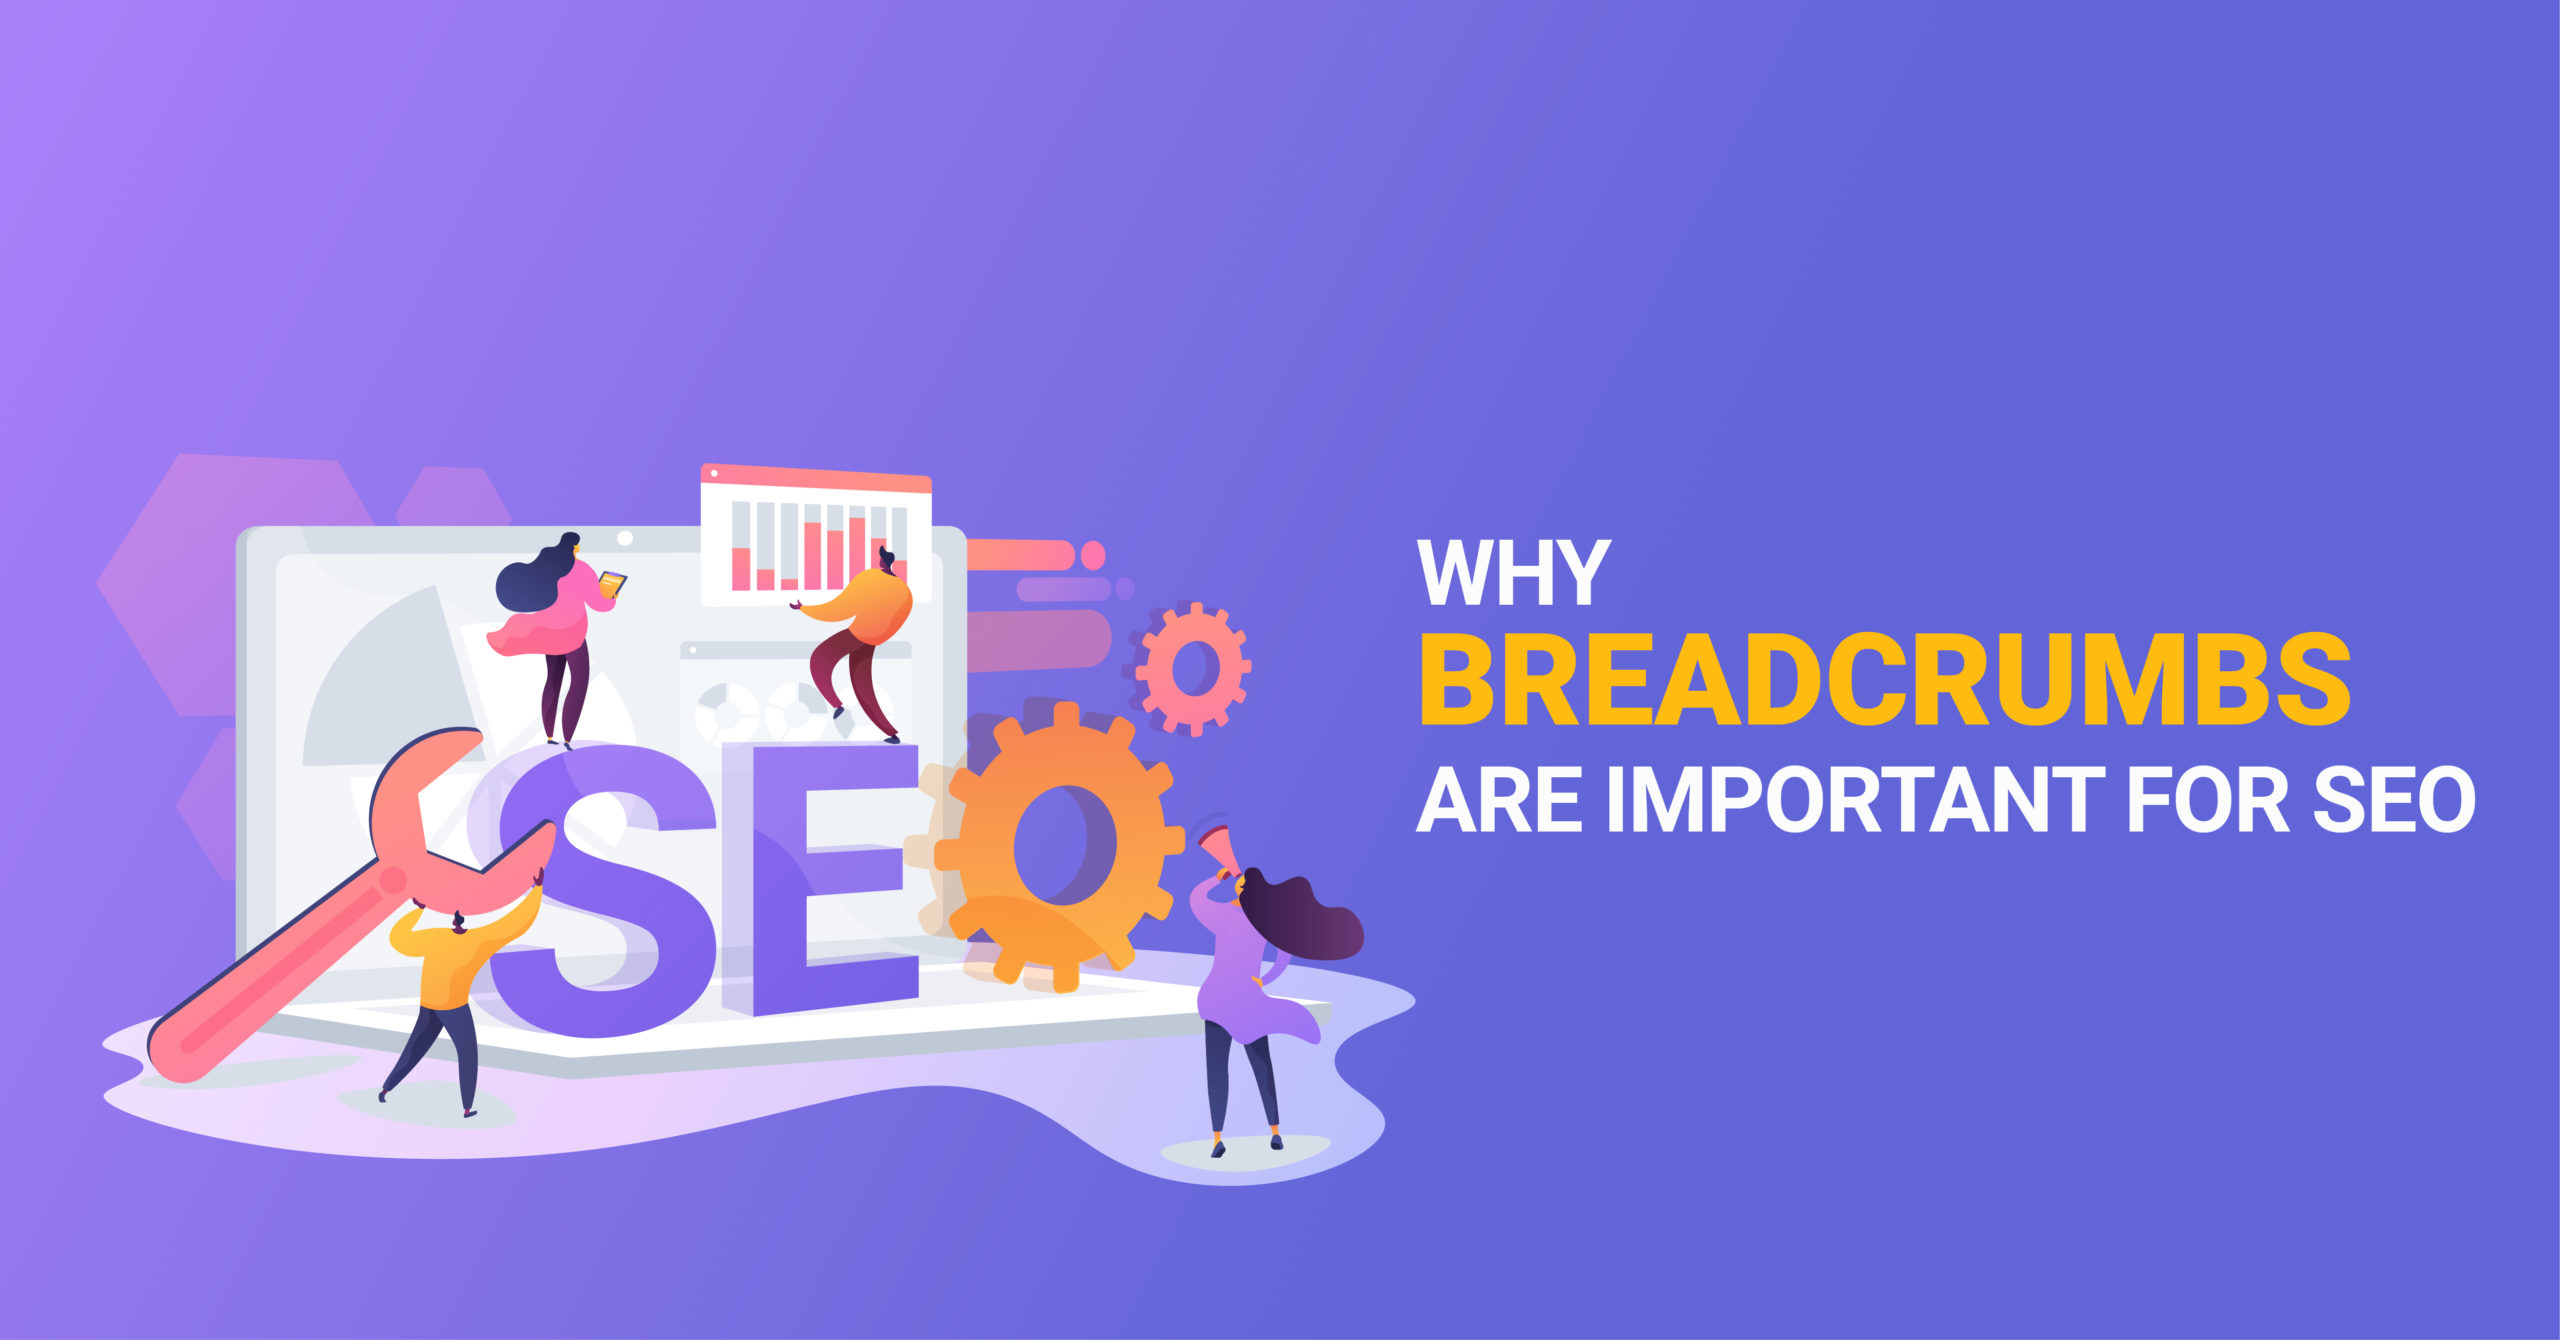 Why Is Breadcrumb Navigation Important For SEO